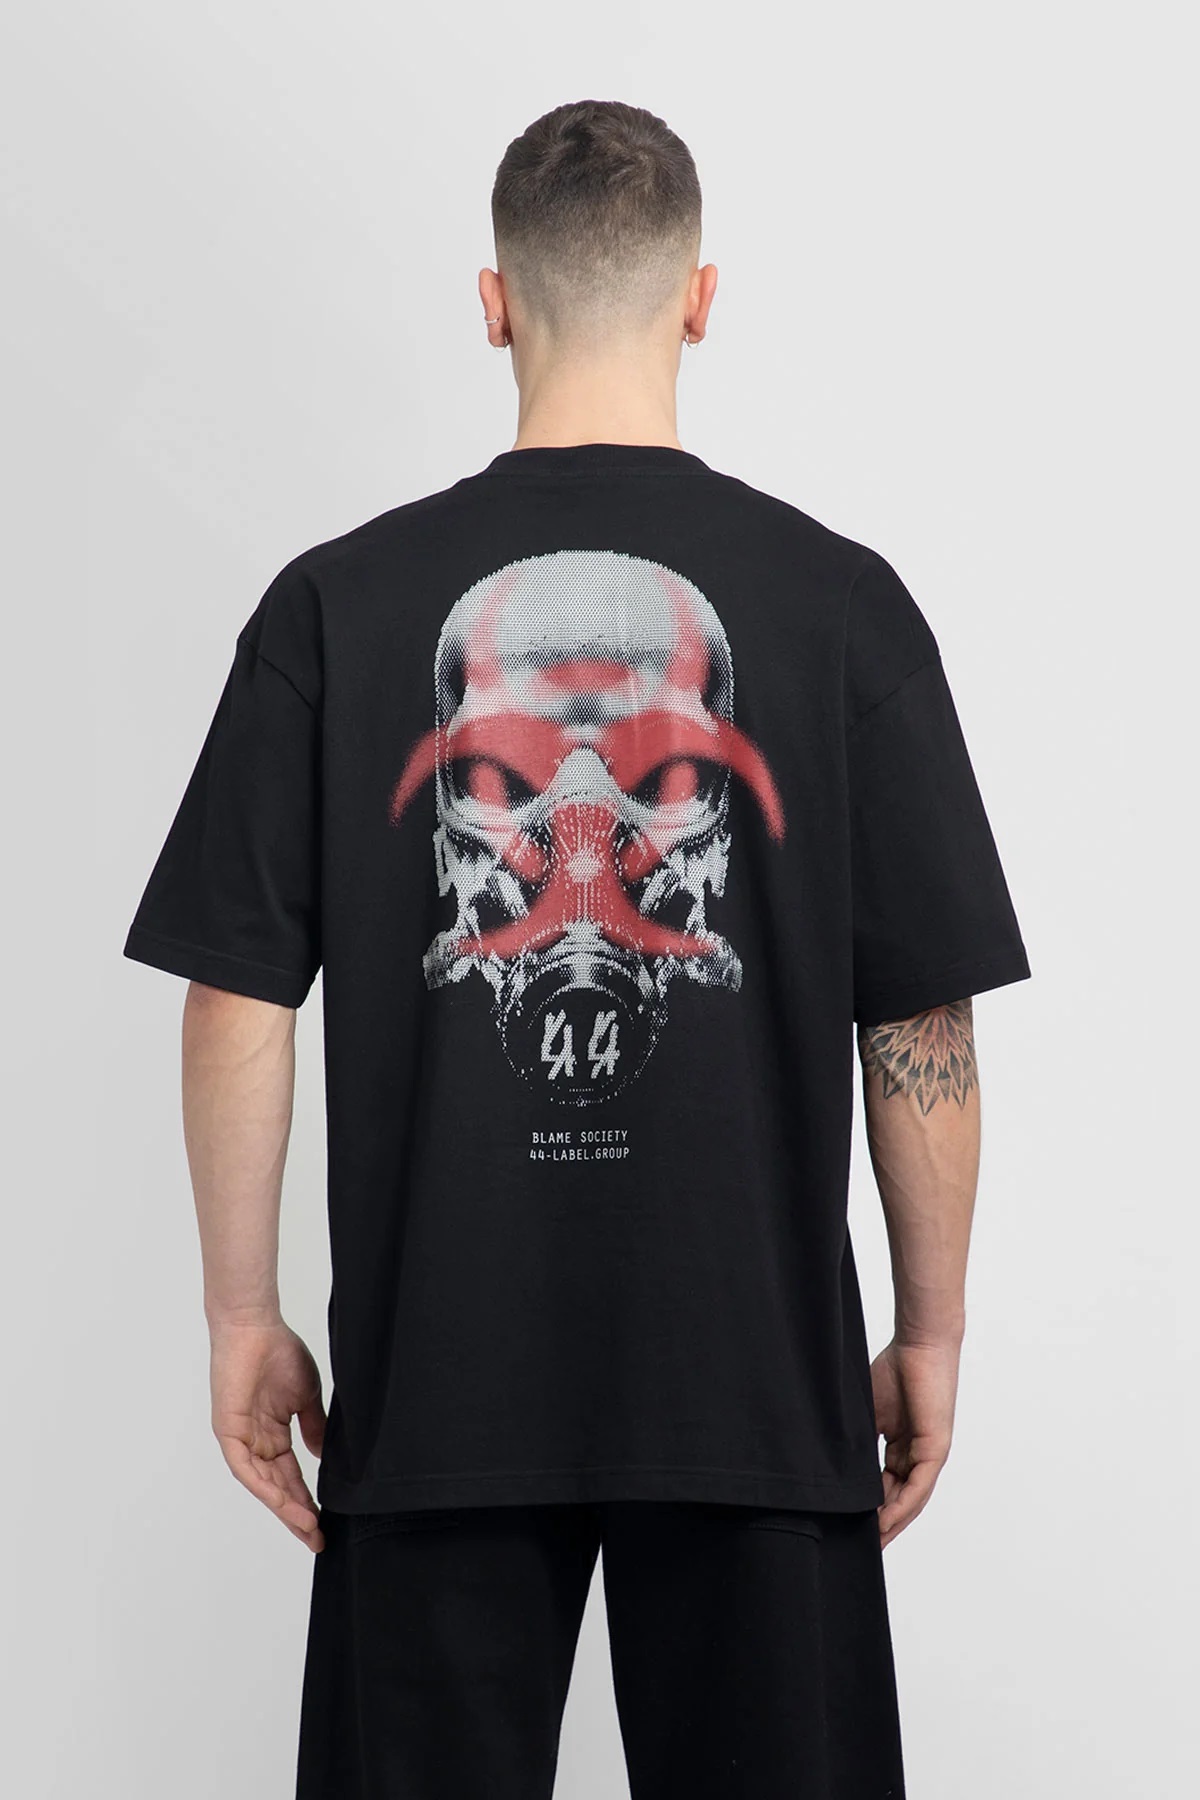 44 LABEL GROUP Fallout T-Shirt in Black L